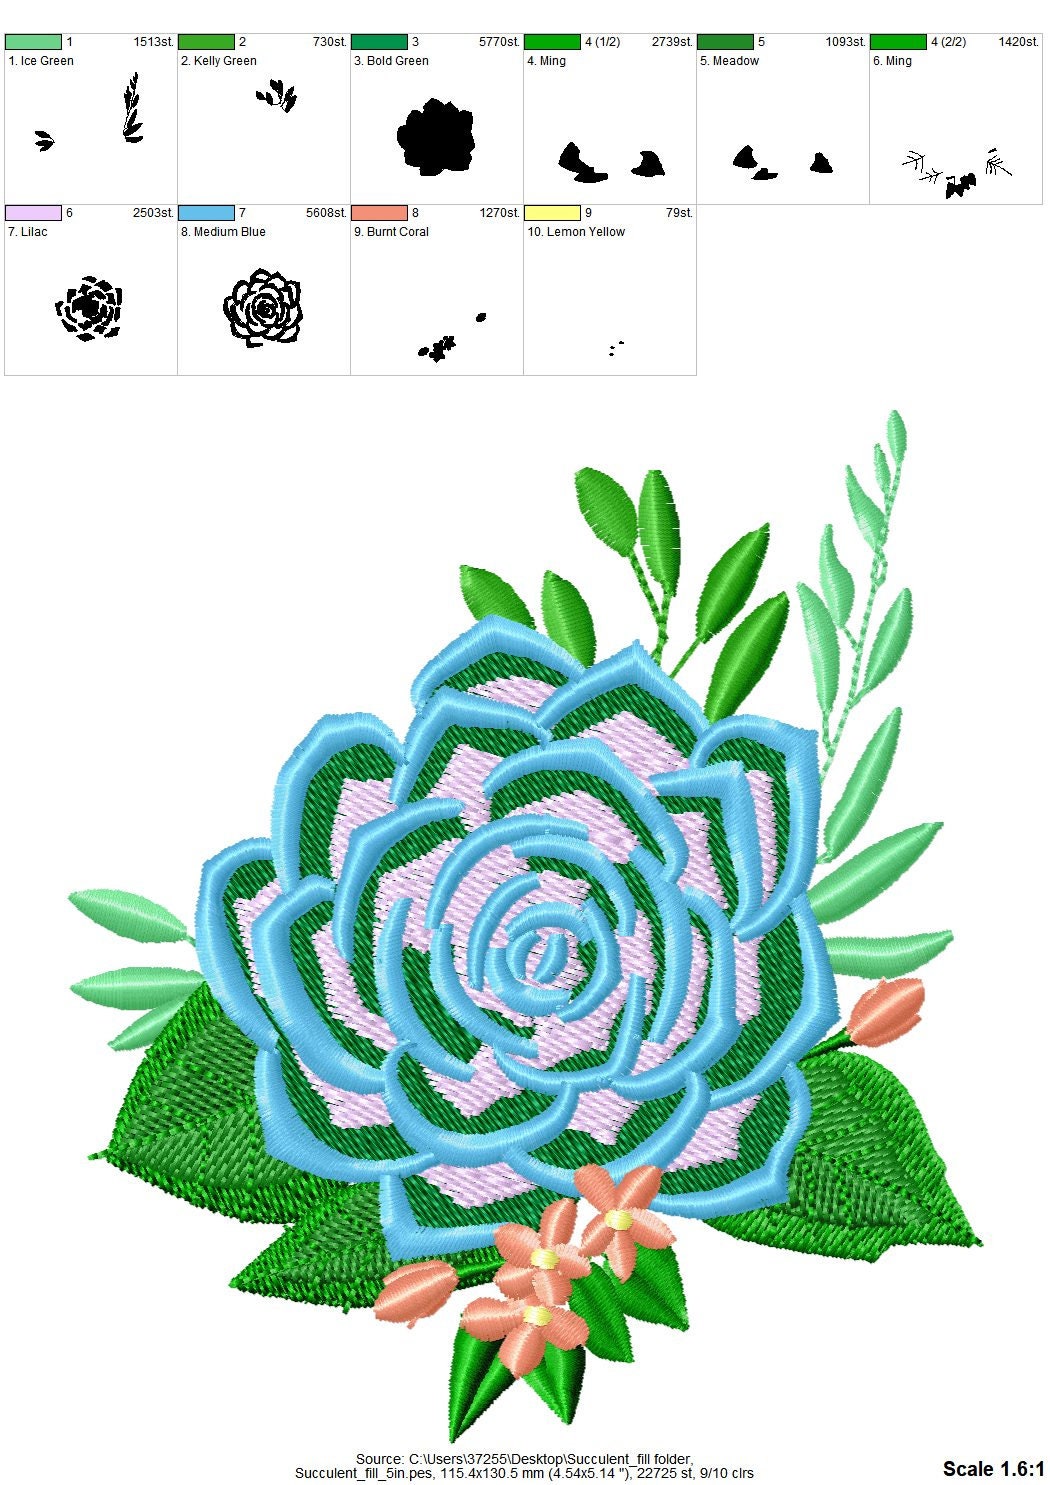 Succulent Bouquet flowers floral composition machine embroidery designs assorted sizes succulent cactus plant wee blossom bloom embroidery